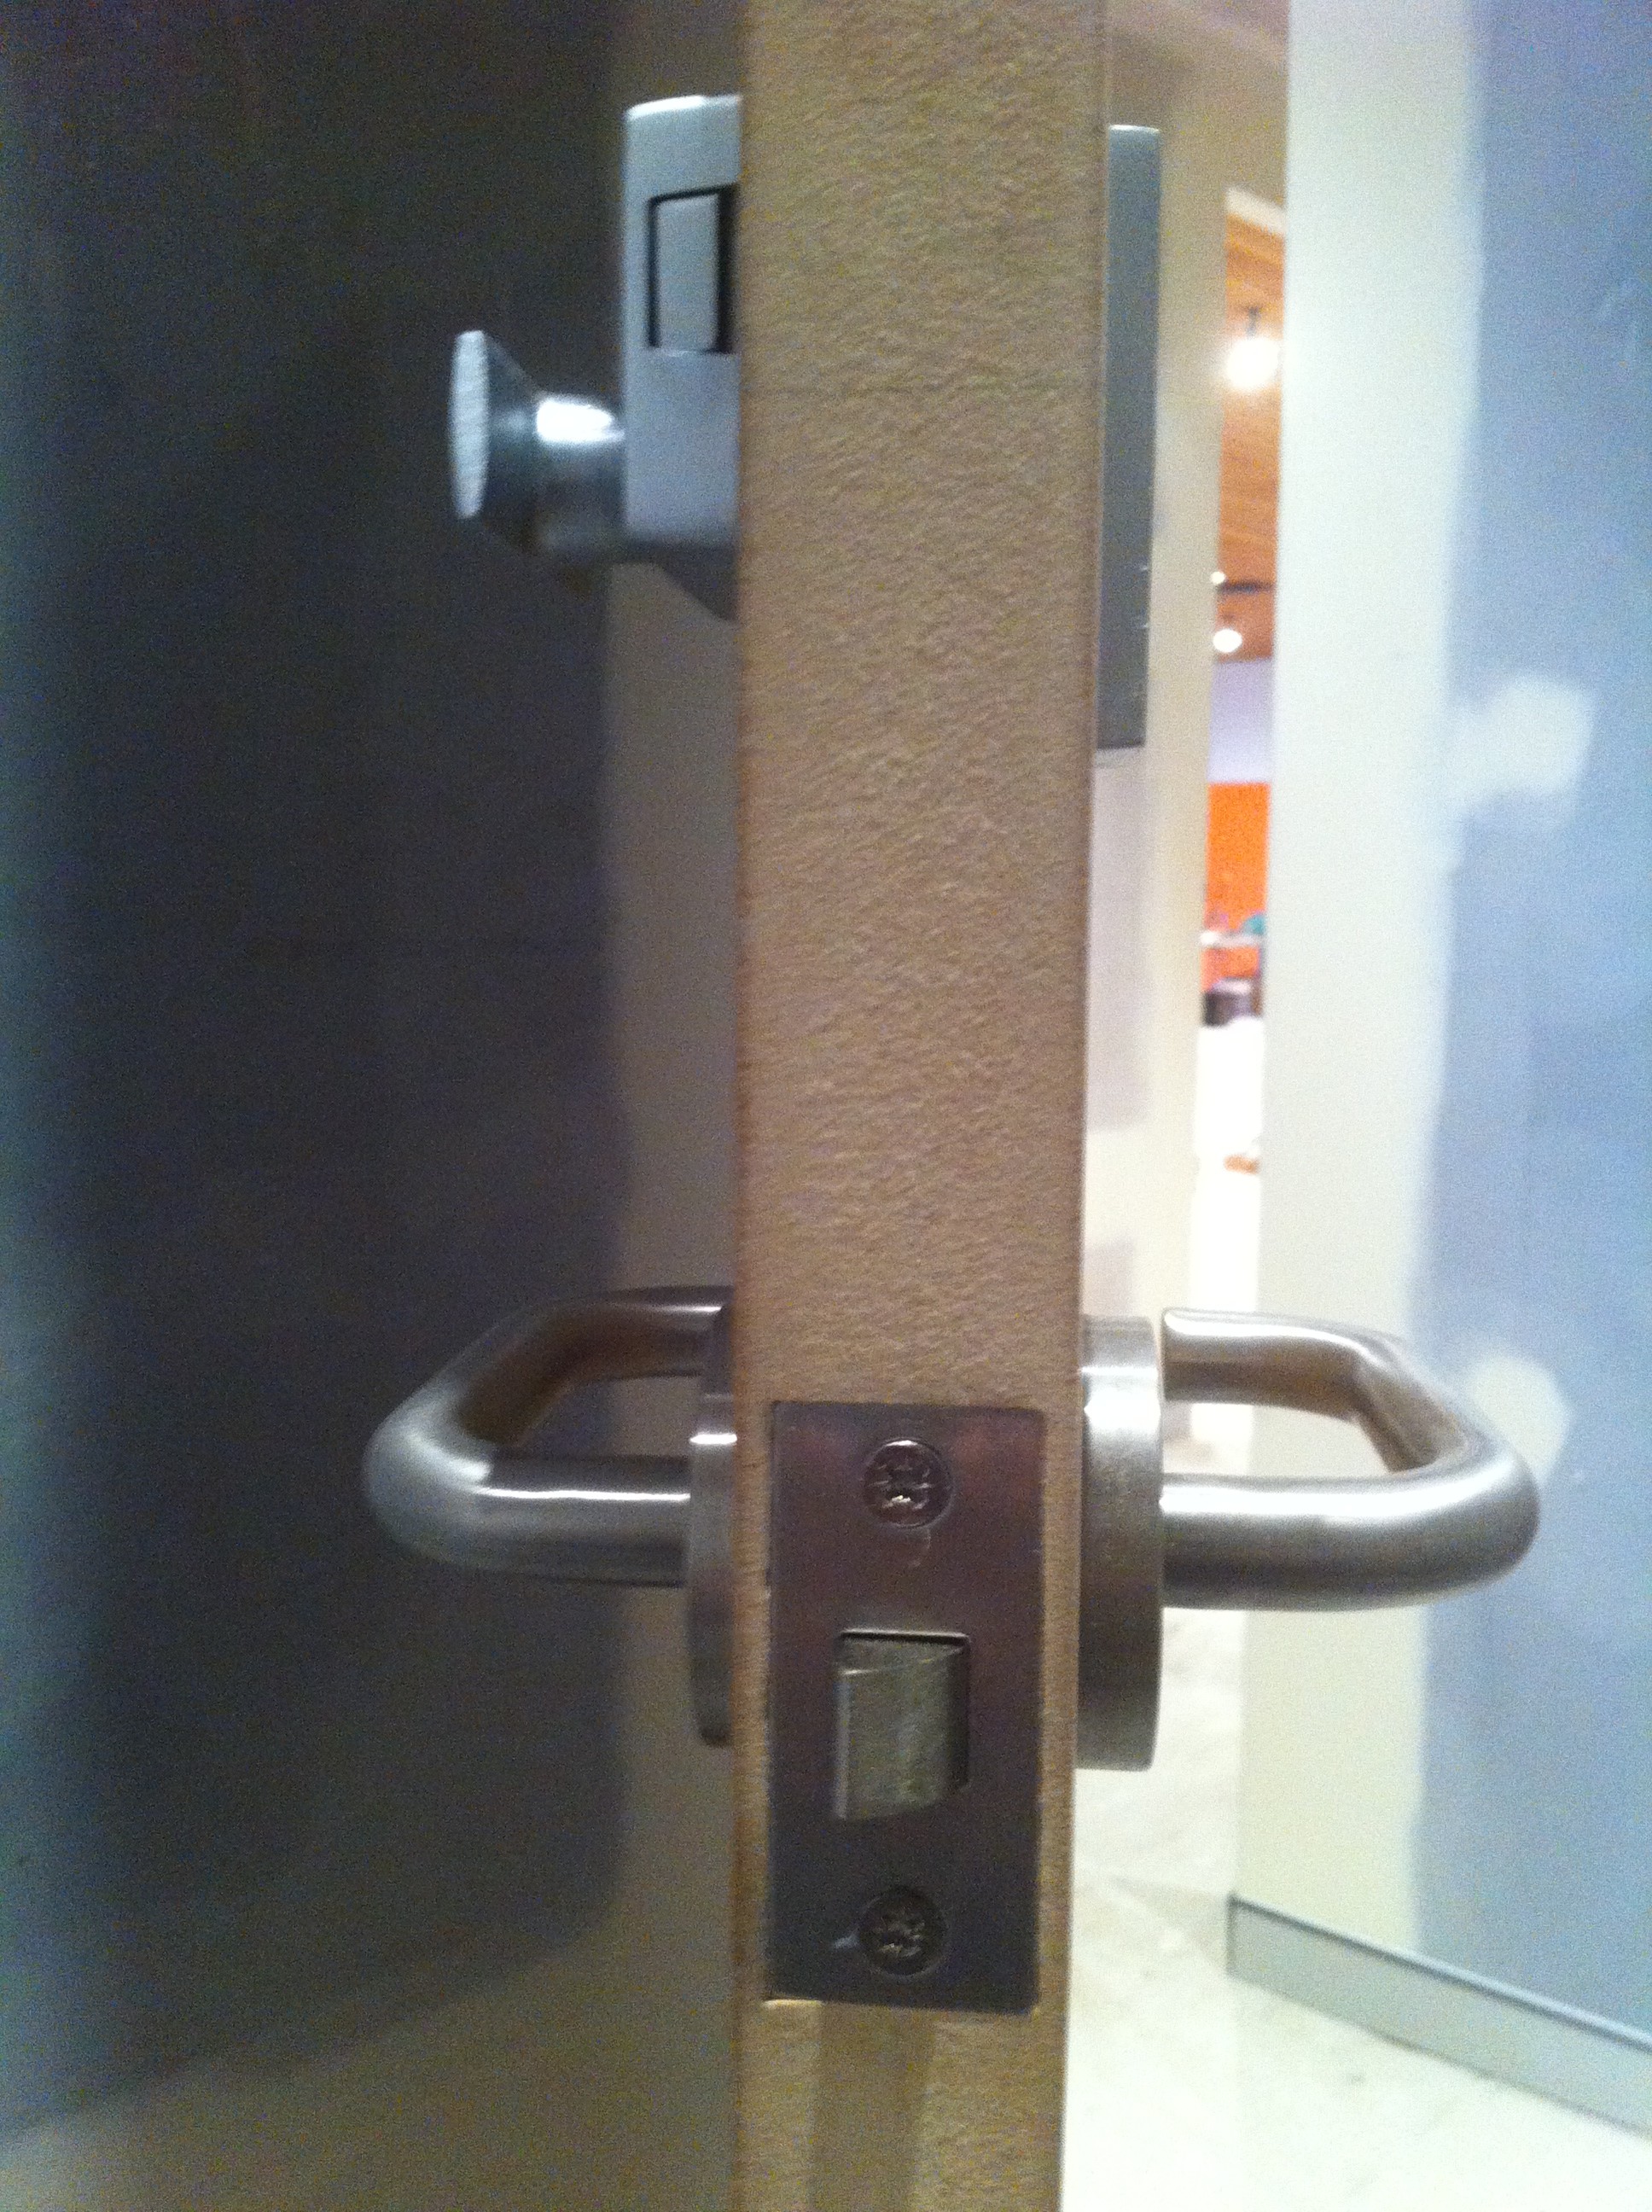 Indicator Bolt & Lever Lock Fitted to MDF Door